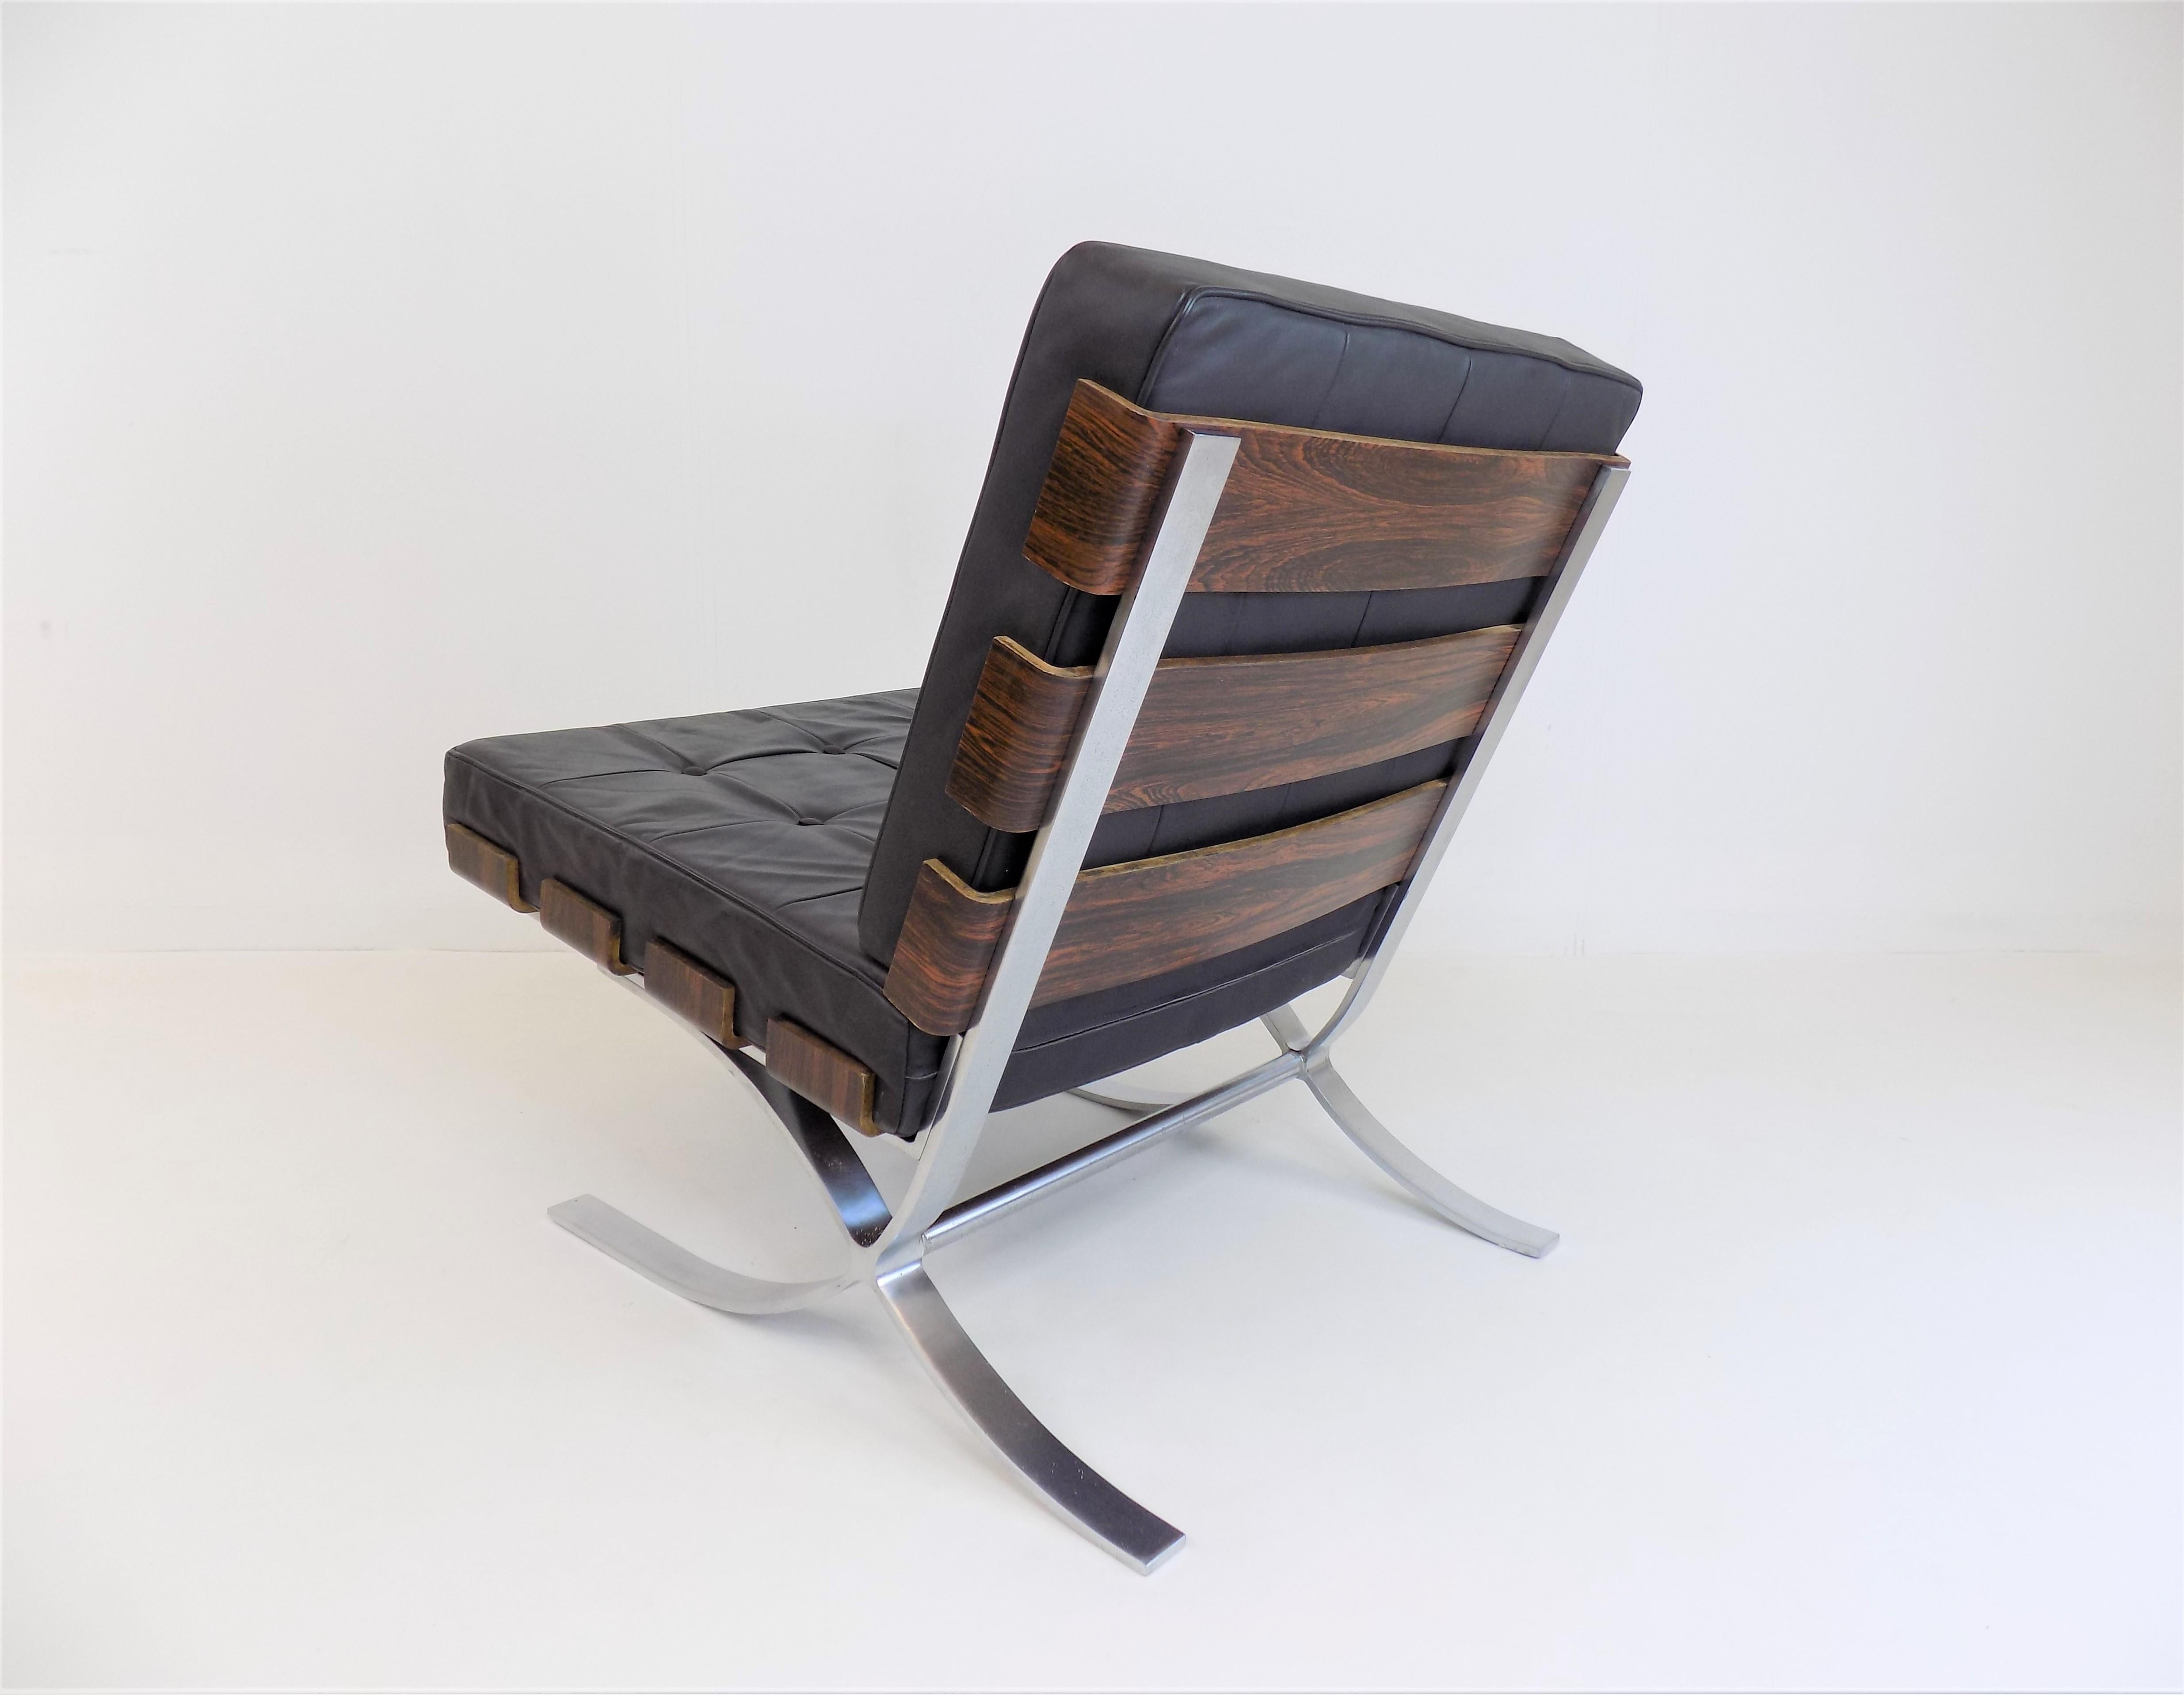 A Fröscher Barcelona chair in excellent condition with genuine leather cushions. The leather of the armchair is flawless, the suspension under the seat cushion has been renewed and the rosewood slats of the armchair are in very good condition. The